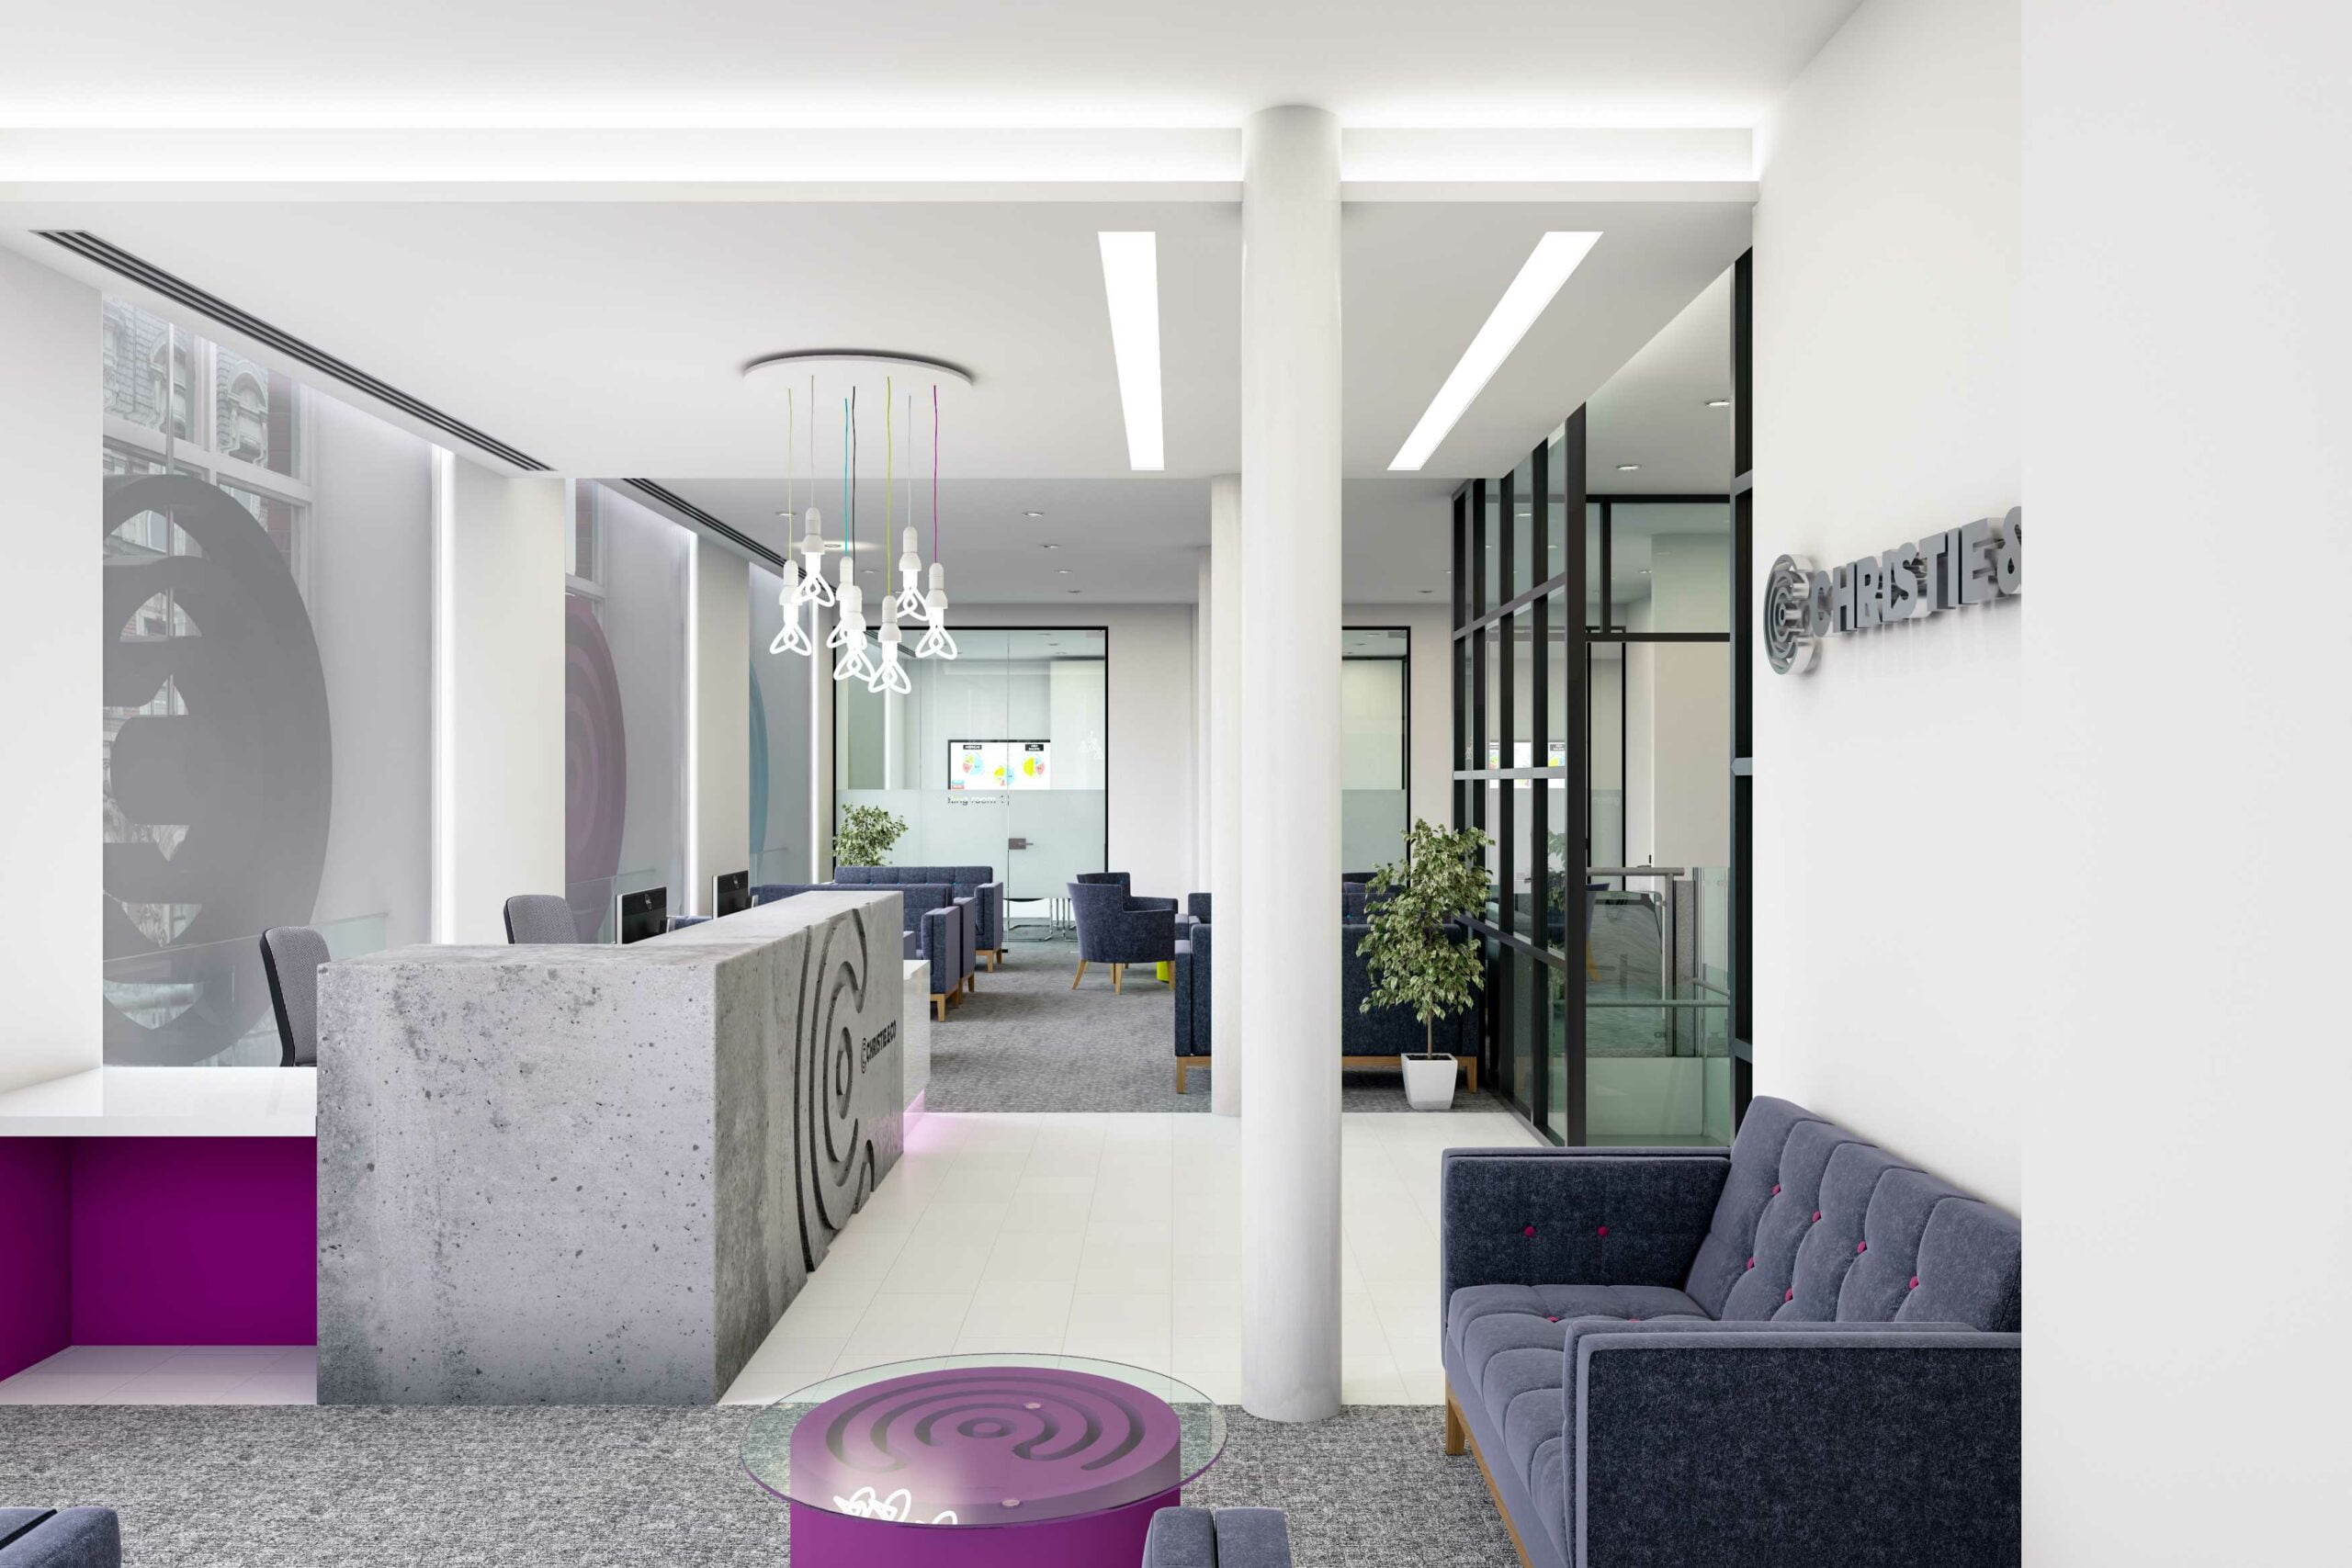 An office reception with purple accent features and grey furniture.